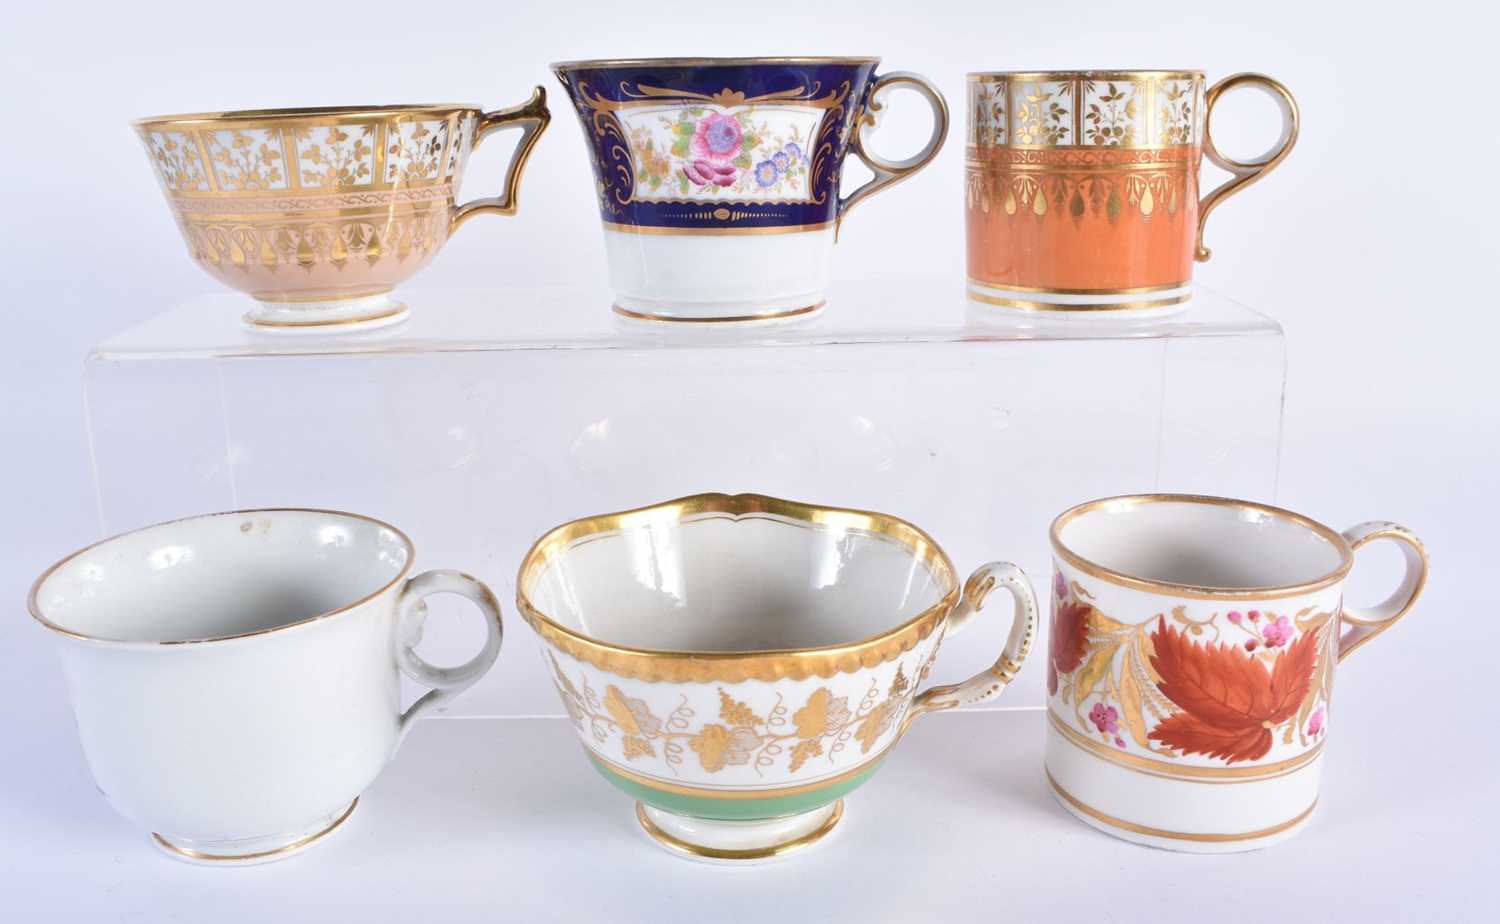 TWELVE LATE 18TH/19TH CENTURY ENGLISH PORCELAIN CUPS including Chmaberlains & Graingers Worcester. - Image 6 of 9